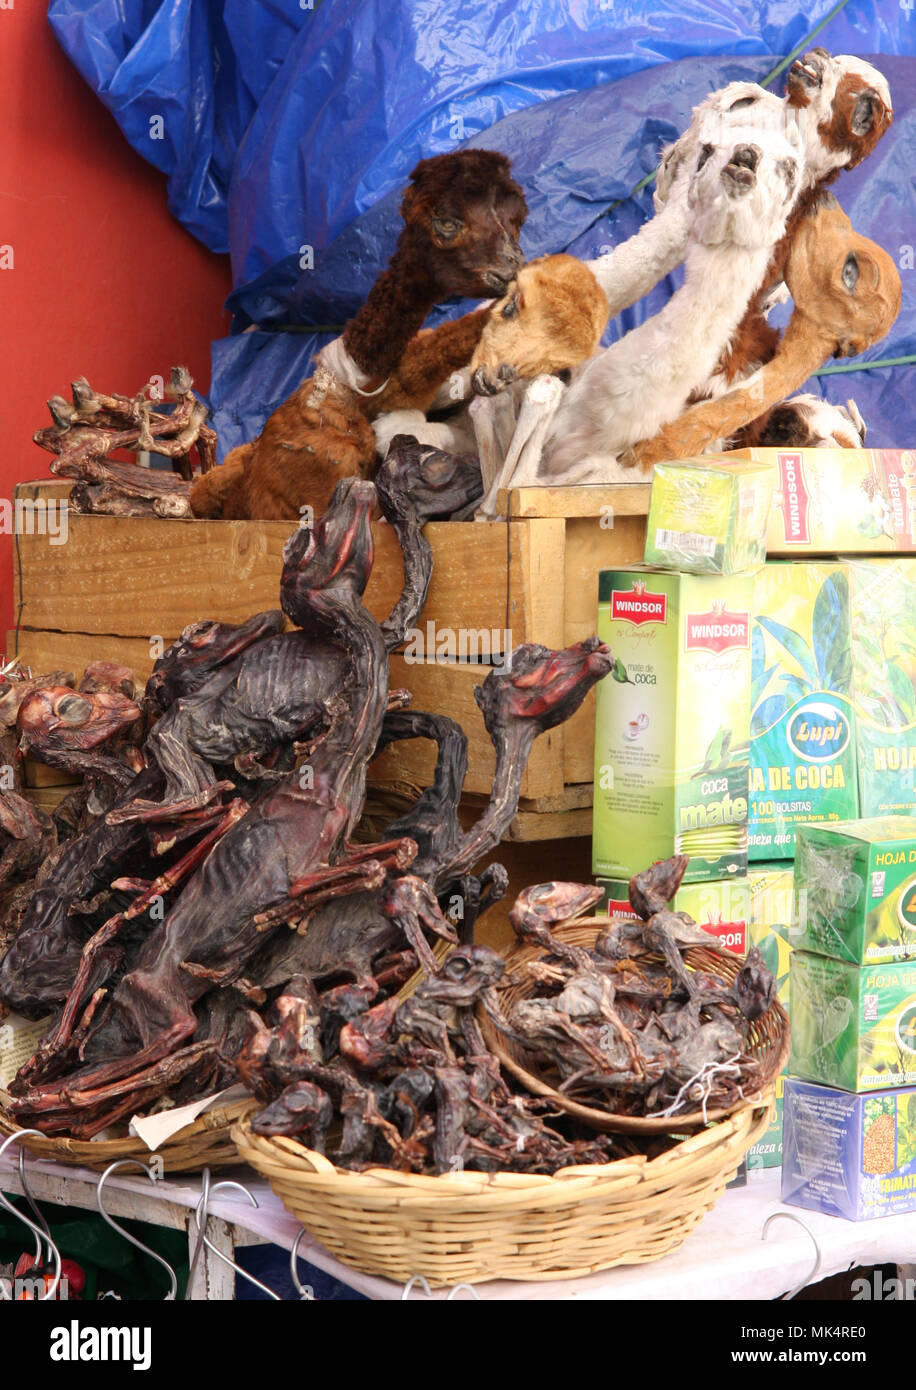 LA PAZ, BOLIVIA - SEPTEMBER 27, 2011: Dried llama fetuses and other goods displayed for sale at a stall in the Witches Market. These llama fetuses are Stock Photo